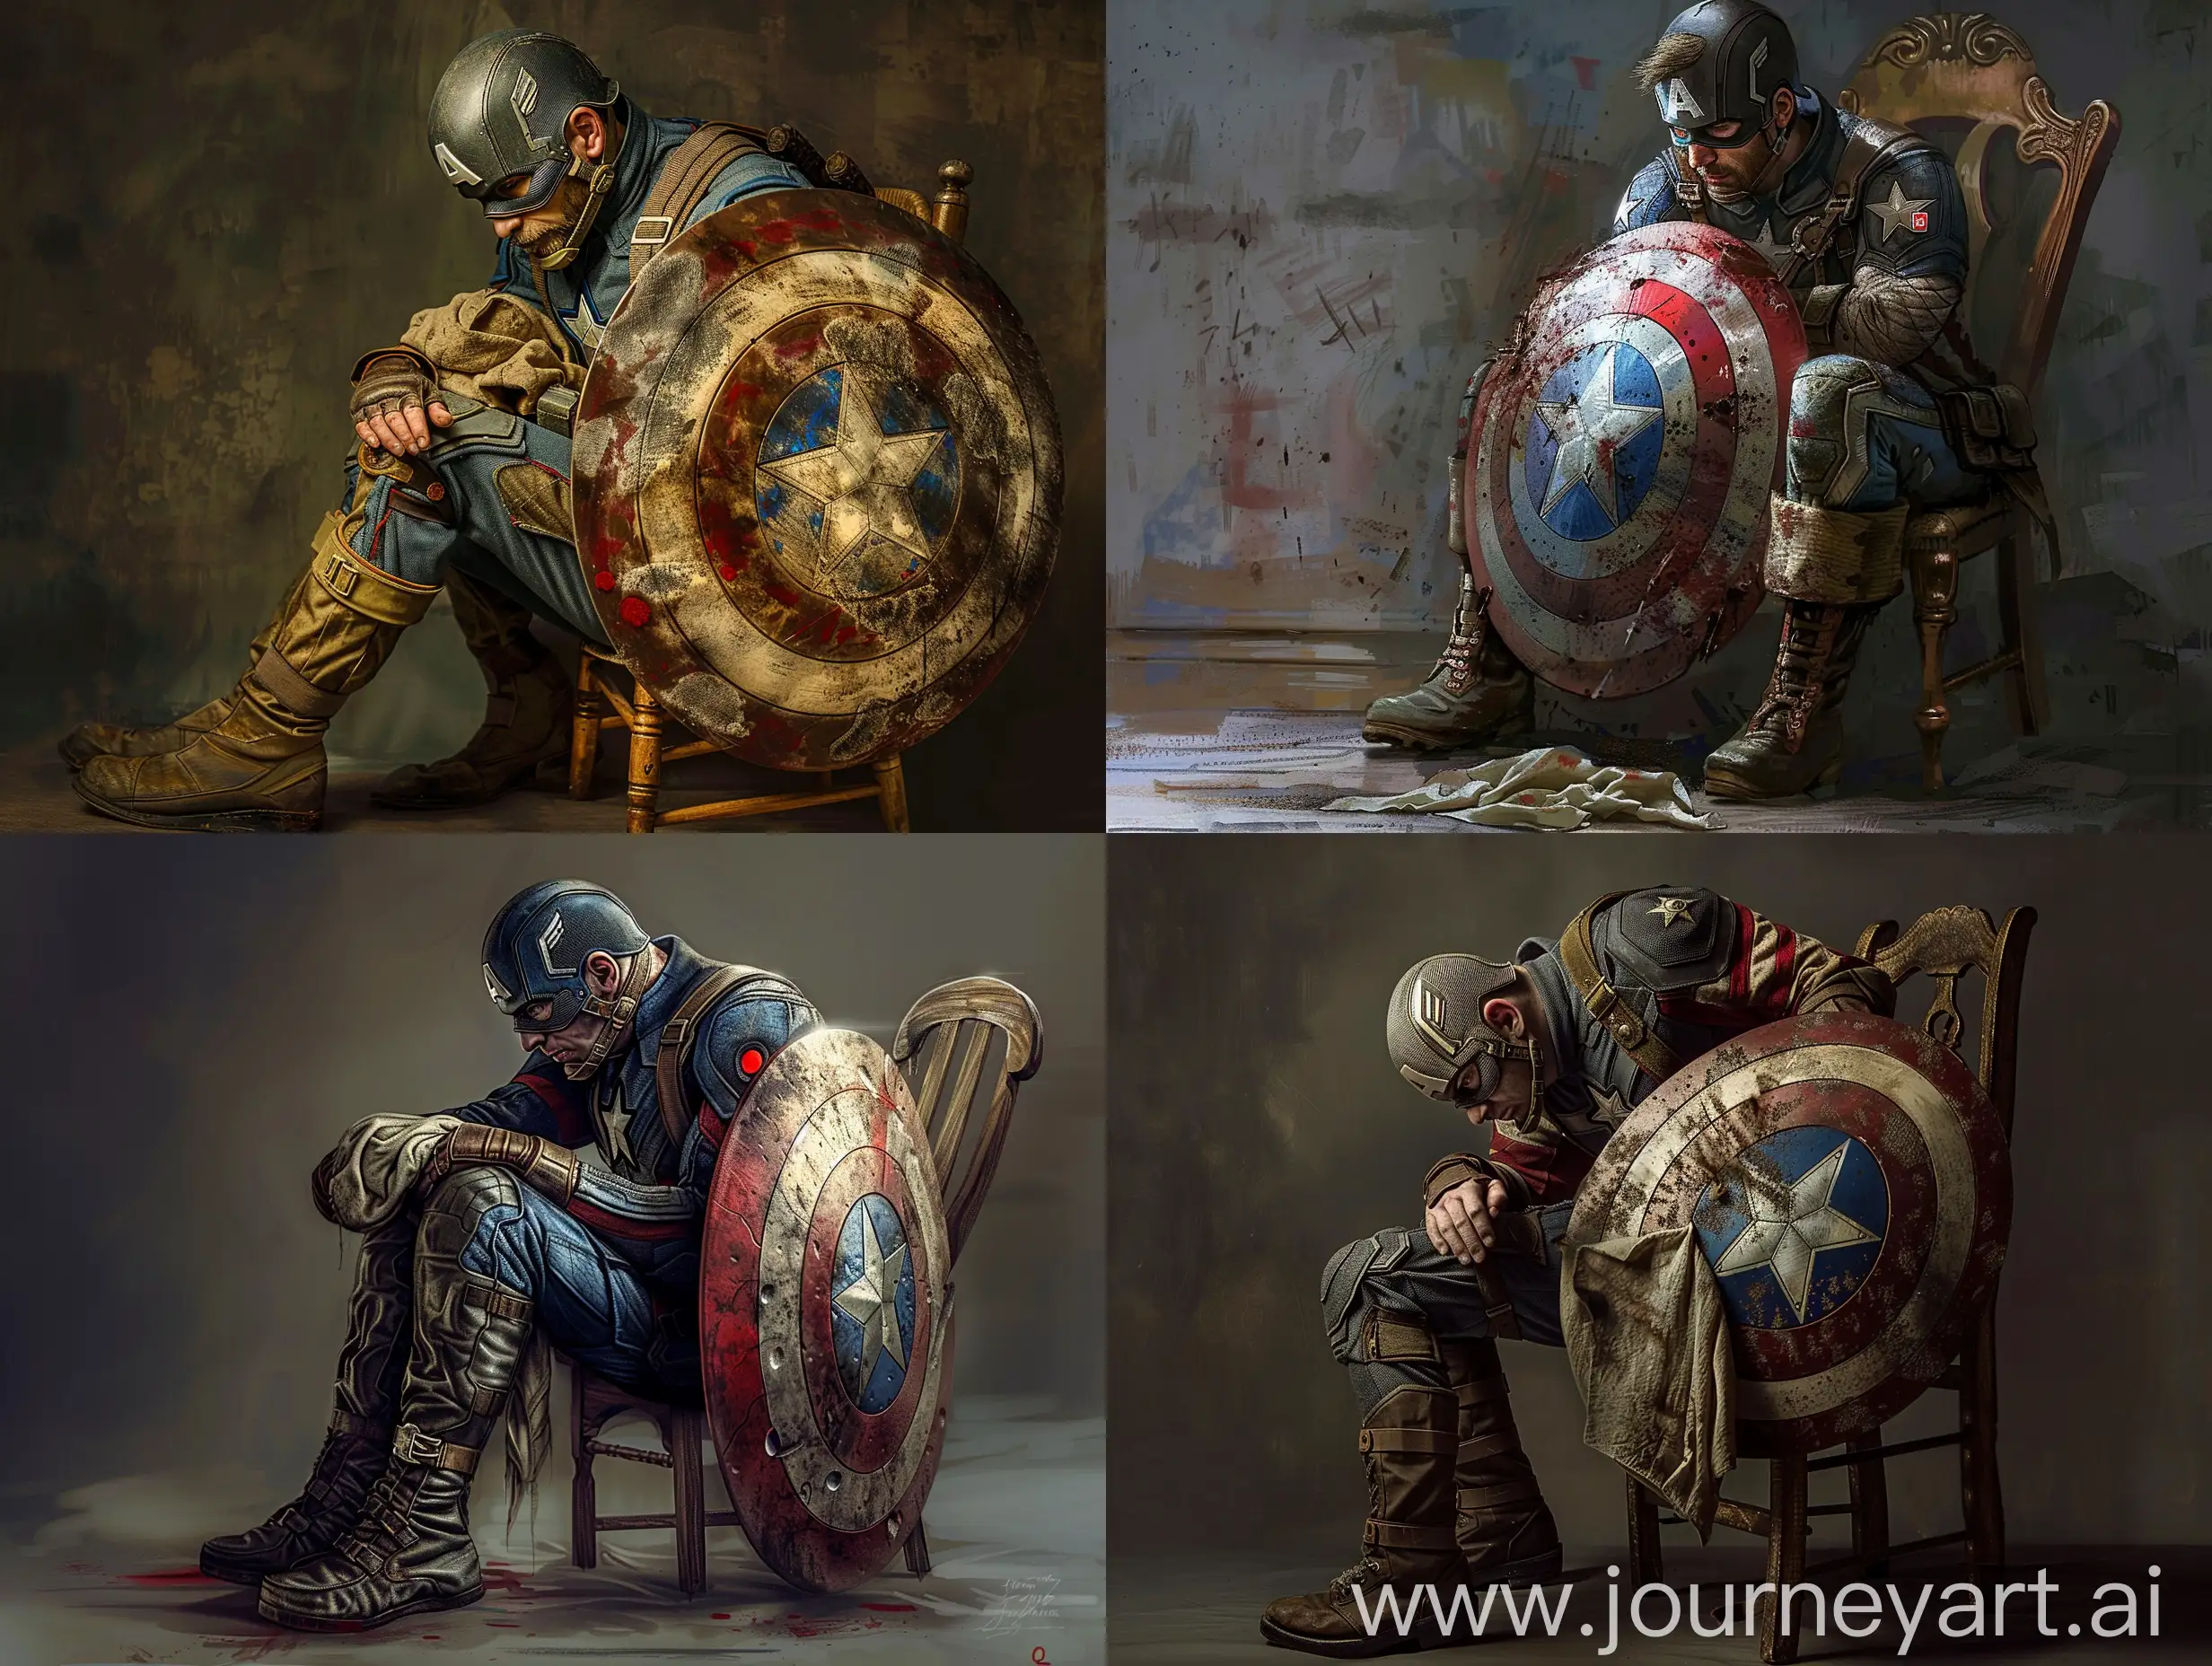 Captain America is one of Marvel's characters, Captain America is dressed as a soldier in the 80s, Captain America is like the soldiers of the Crusades, Captain America's shield is a castle type from the 15th century, Captain America is an old handkerchief in He has his right hand, he puts the shield on his left leg, Captain America is sitting on a wooden chair, Captain America is in Camelot Palace in the 15th century, the lighting is classical lighting, prince of persia style witcher, Captain America's face is Tired, excellent quality, very clear, very realistic, q2.